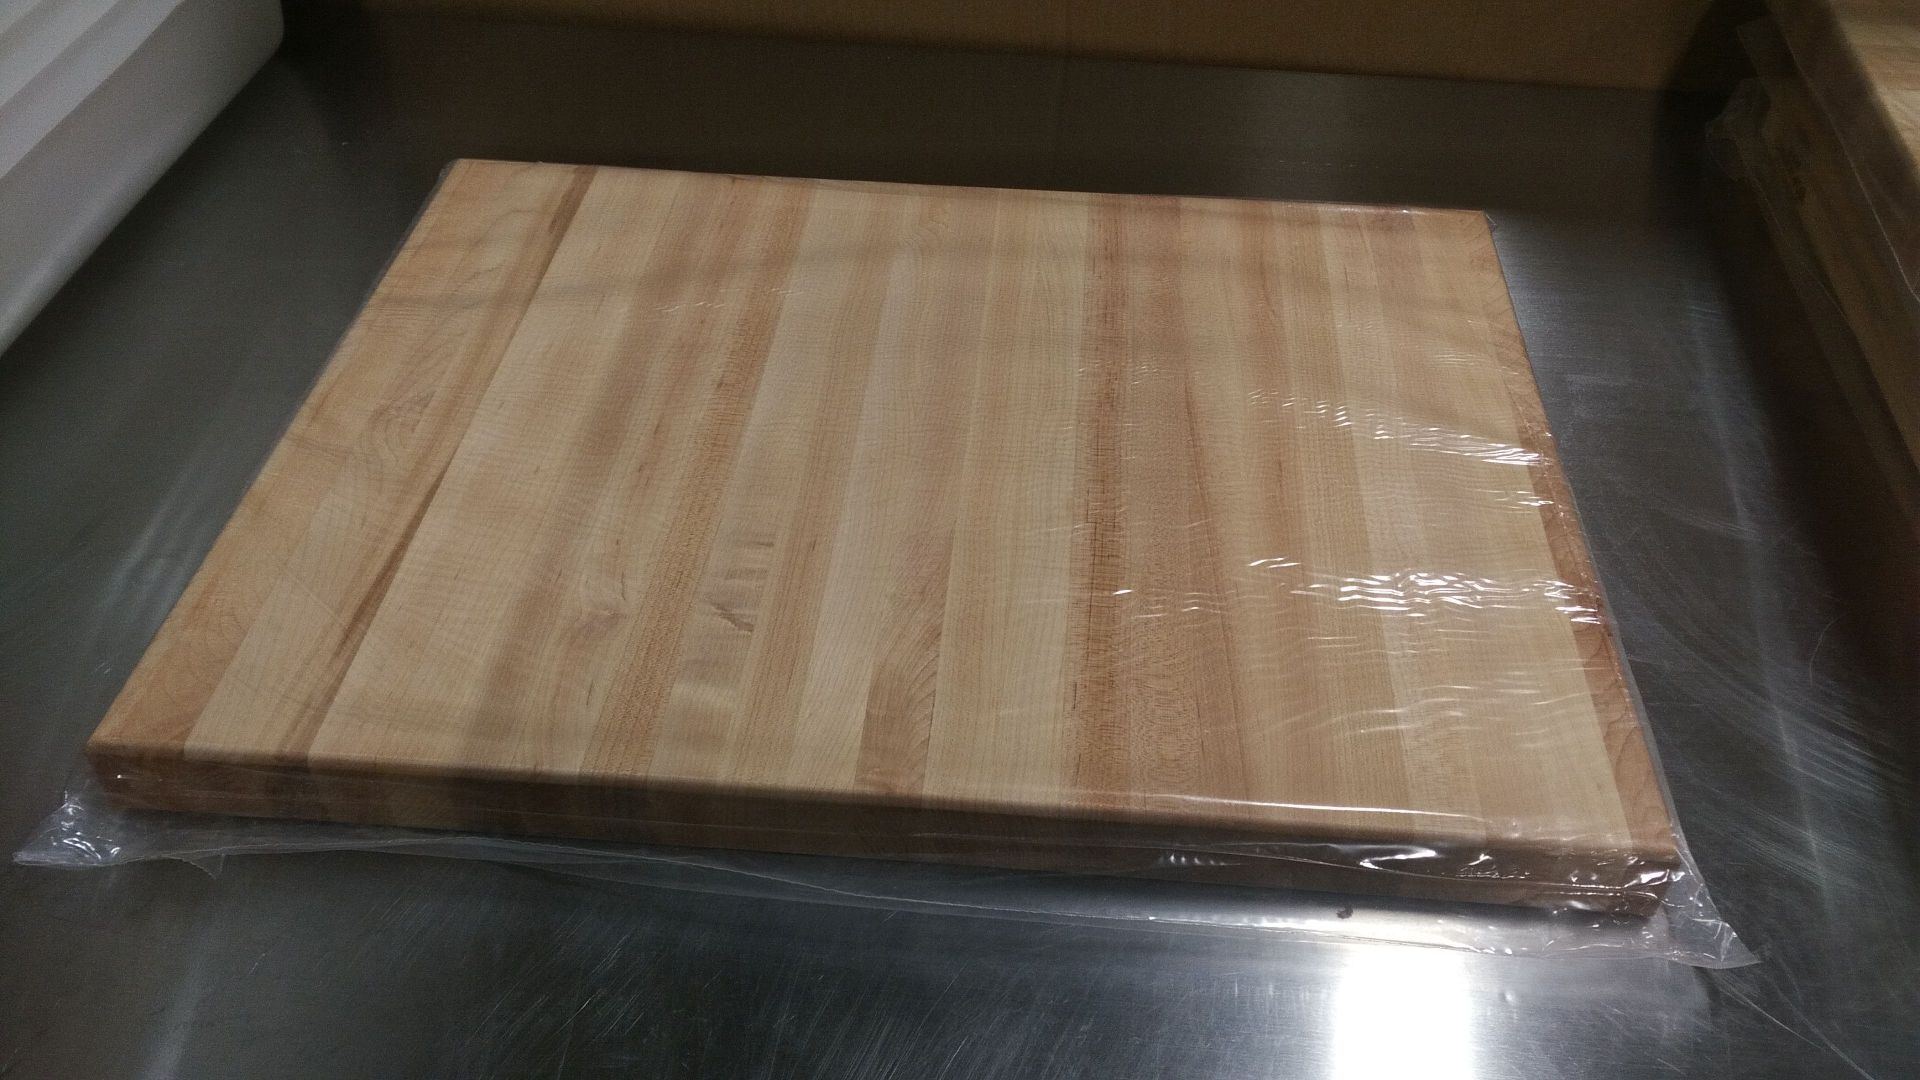 20" x 15" x 1.5" Hard Canadian Maple Carving Board - Image 3 of 3